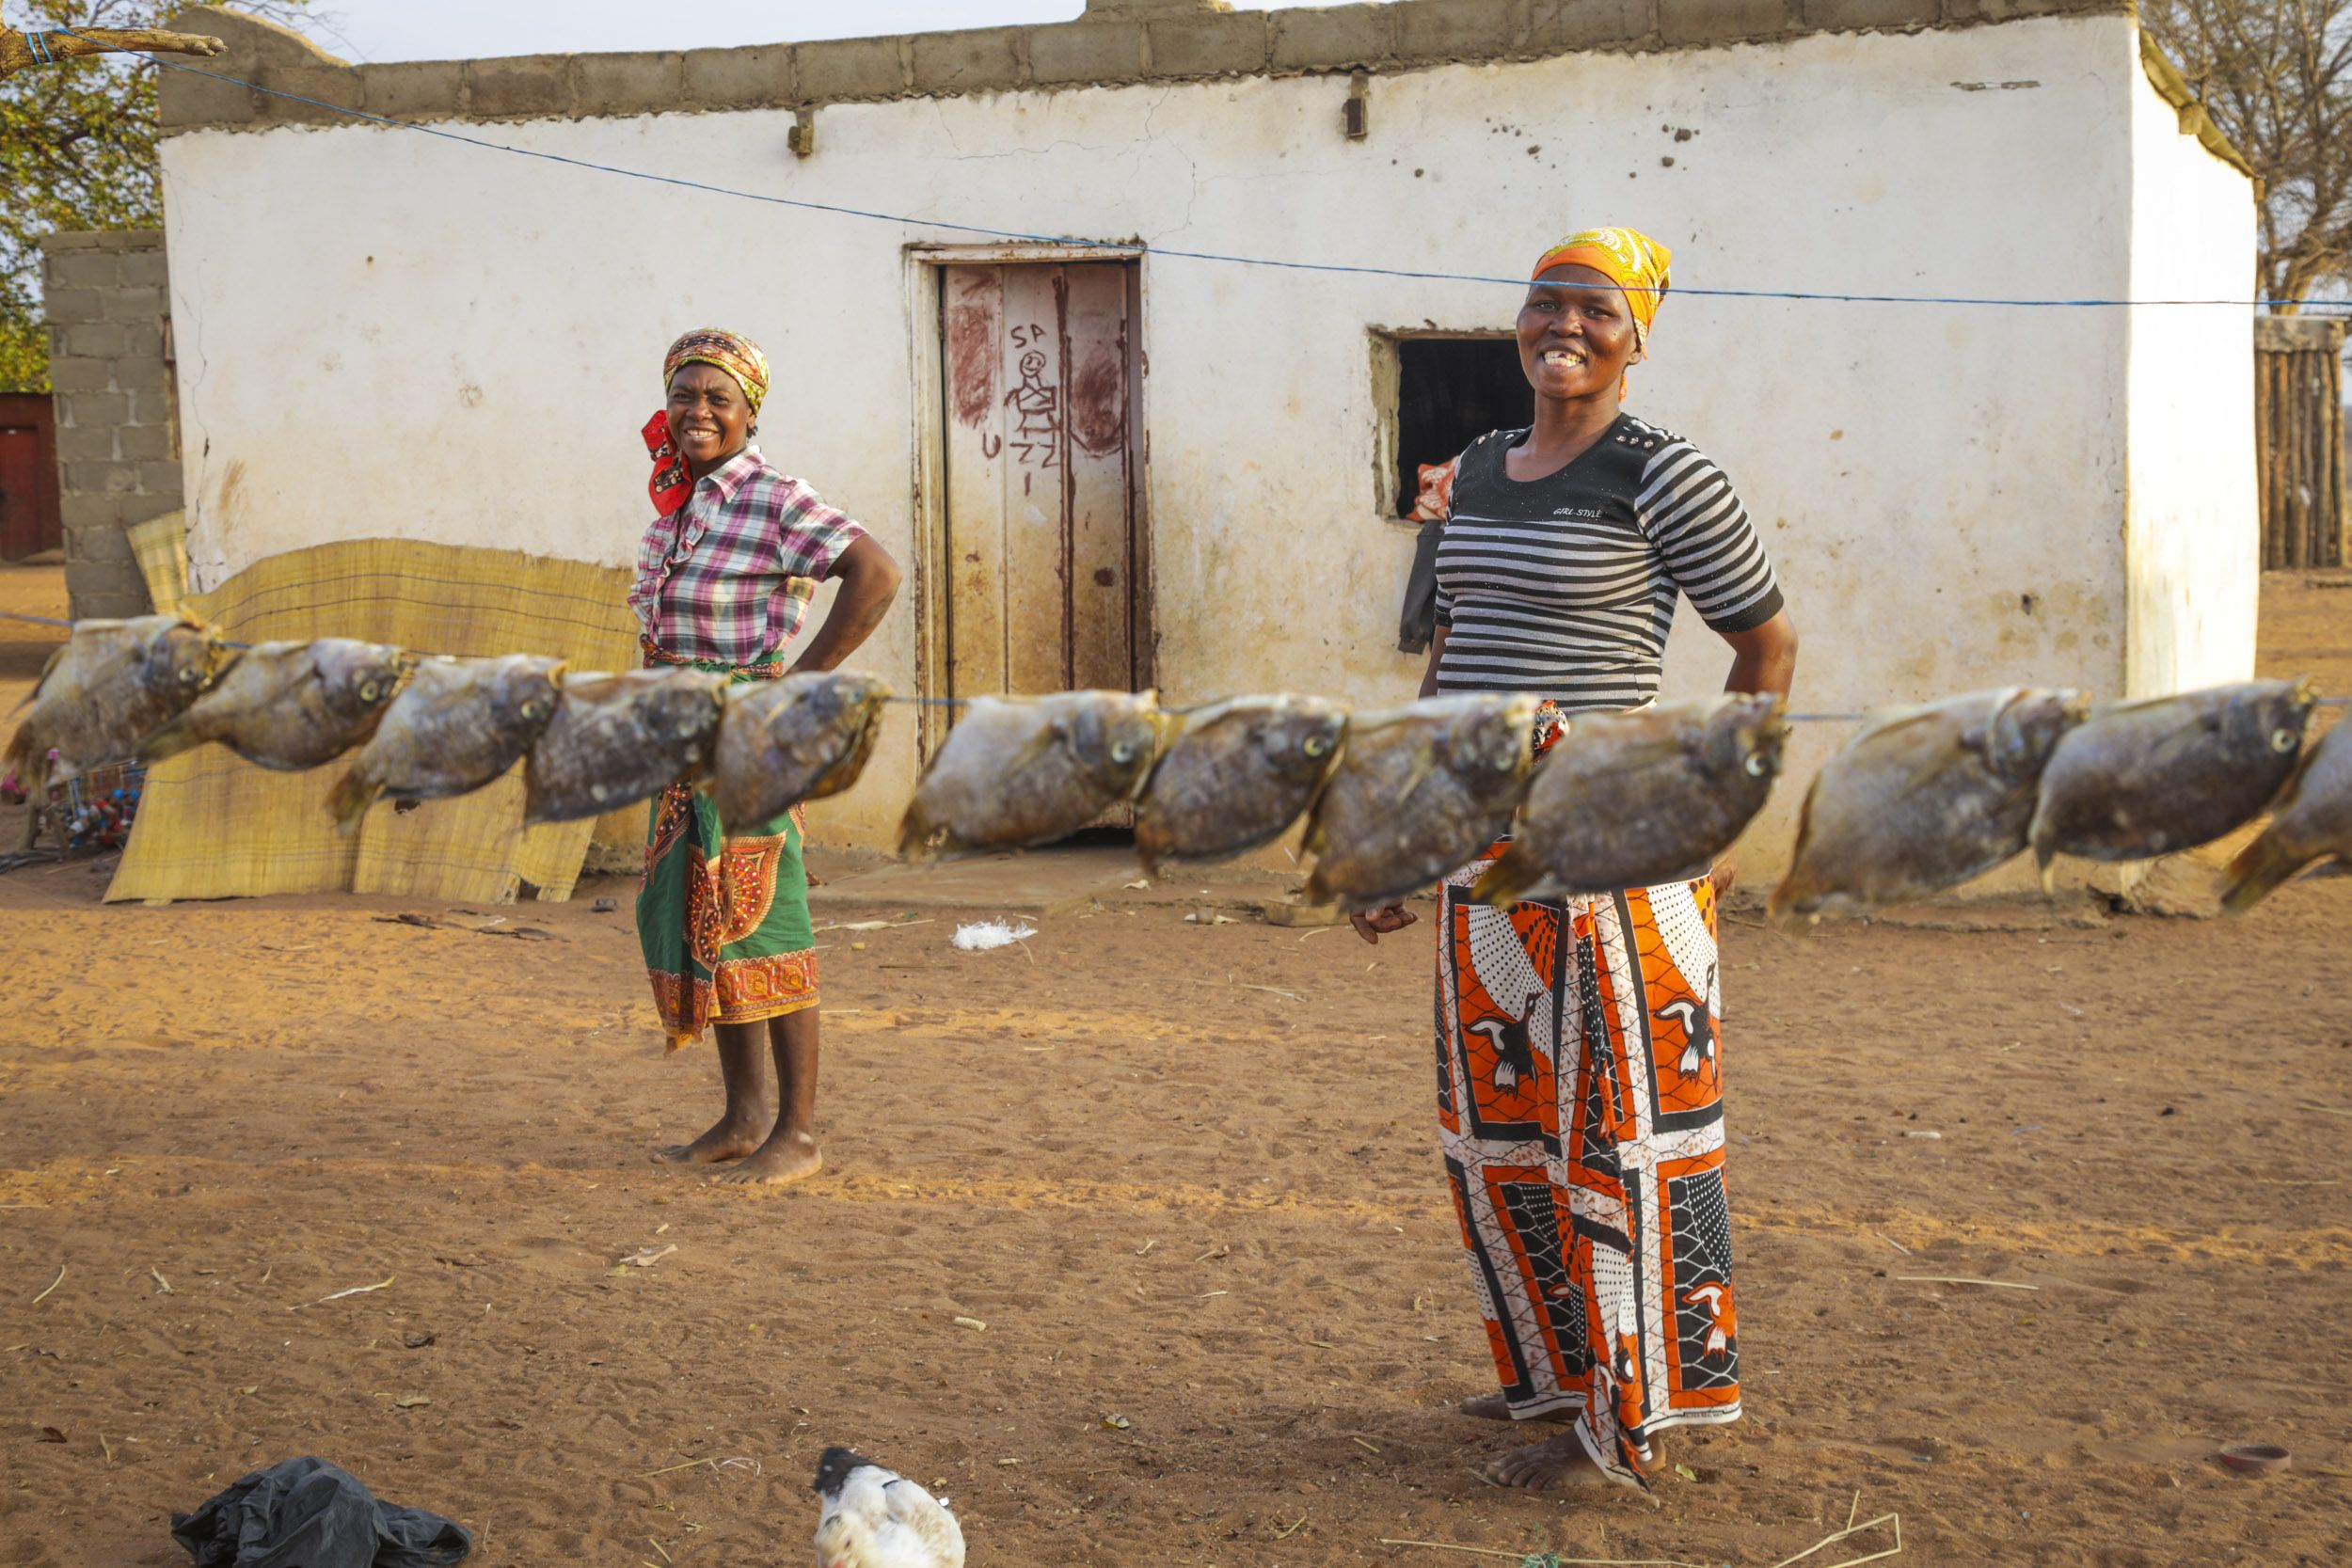 Women of the Mavoze community living inside the Limpopo National Park. Five communities await removal from the park. Image from AfricanDrone/Oxpeckers. Mozambique, 2018.